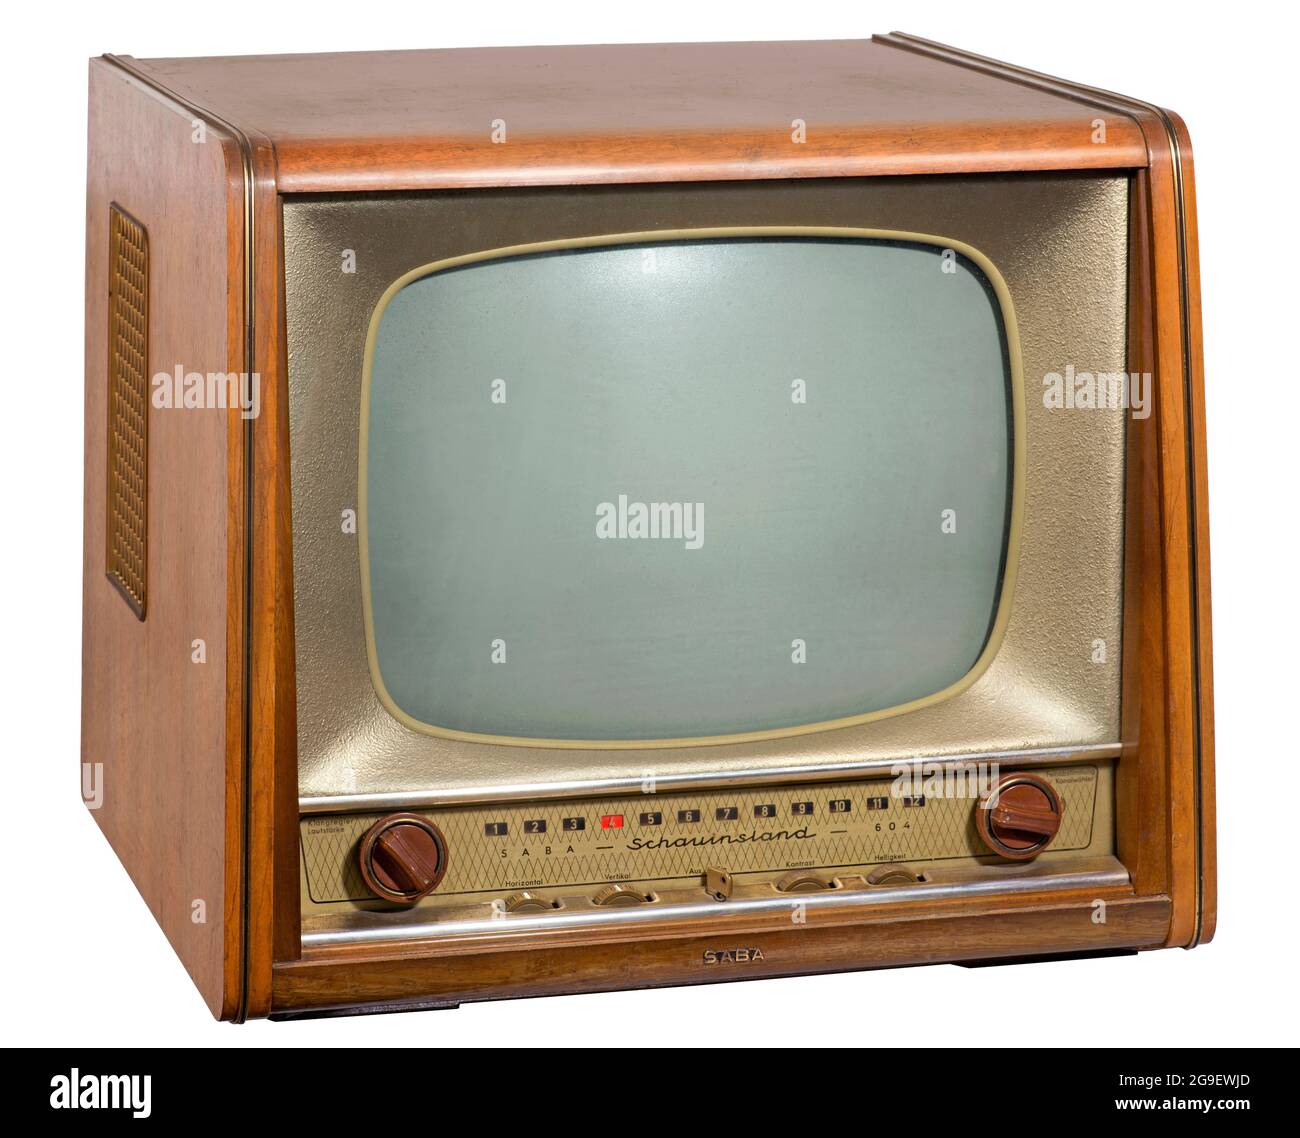 broadcast, television, television set, Saba, Schauinsland T604, tube television, made by SABA, ADDITIONAL-RIGHTS-CLEARANCE-INFO-NOT-AVAILABLE Stock Photo